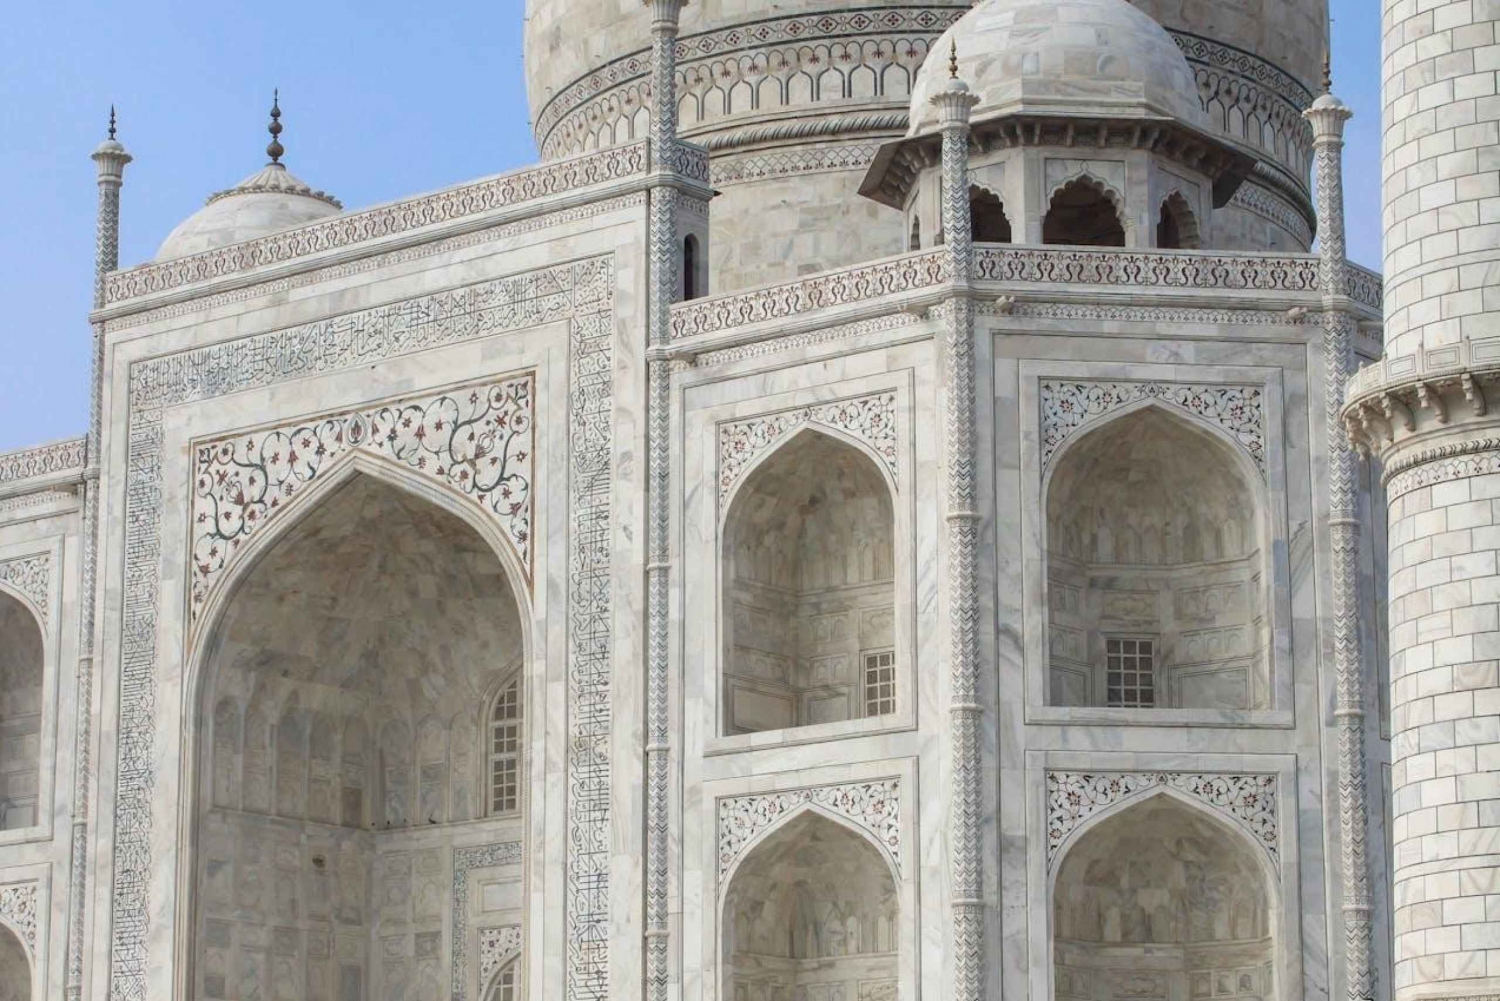 From Delhi: 3-Days Private Trip to Delhi, Agra and Jaipur